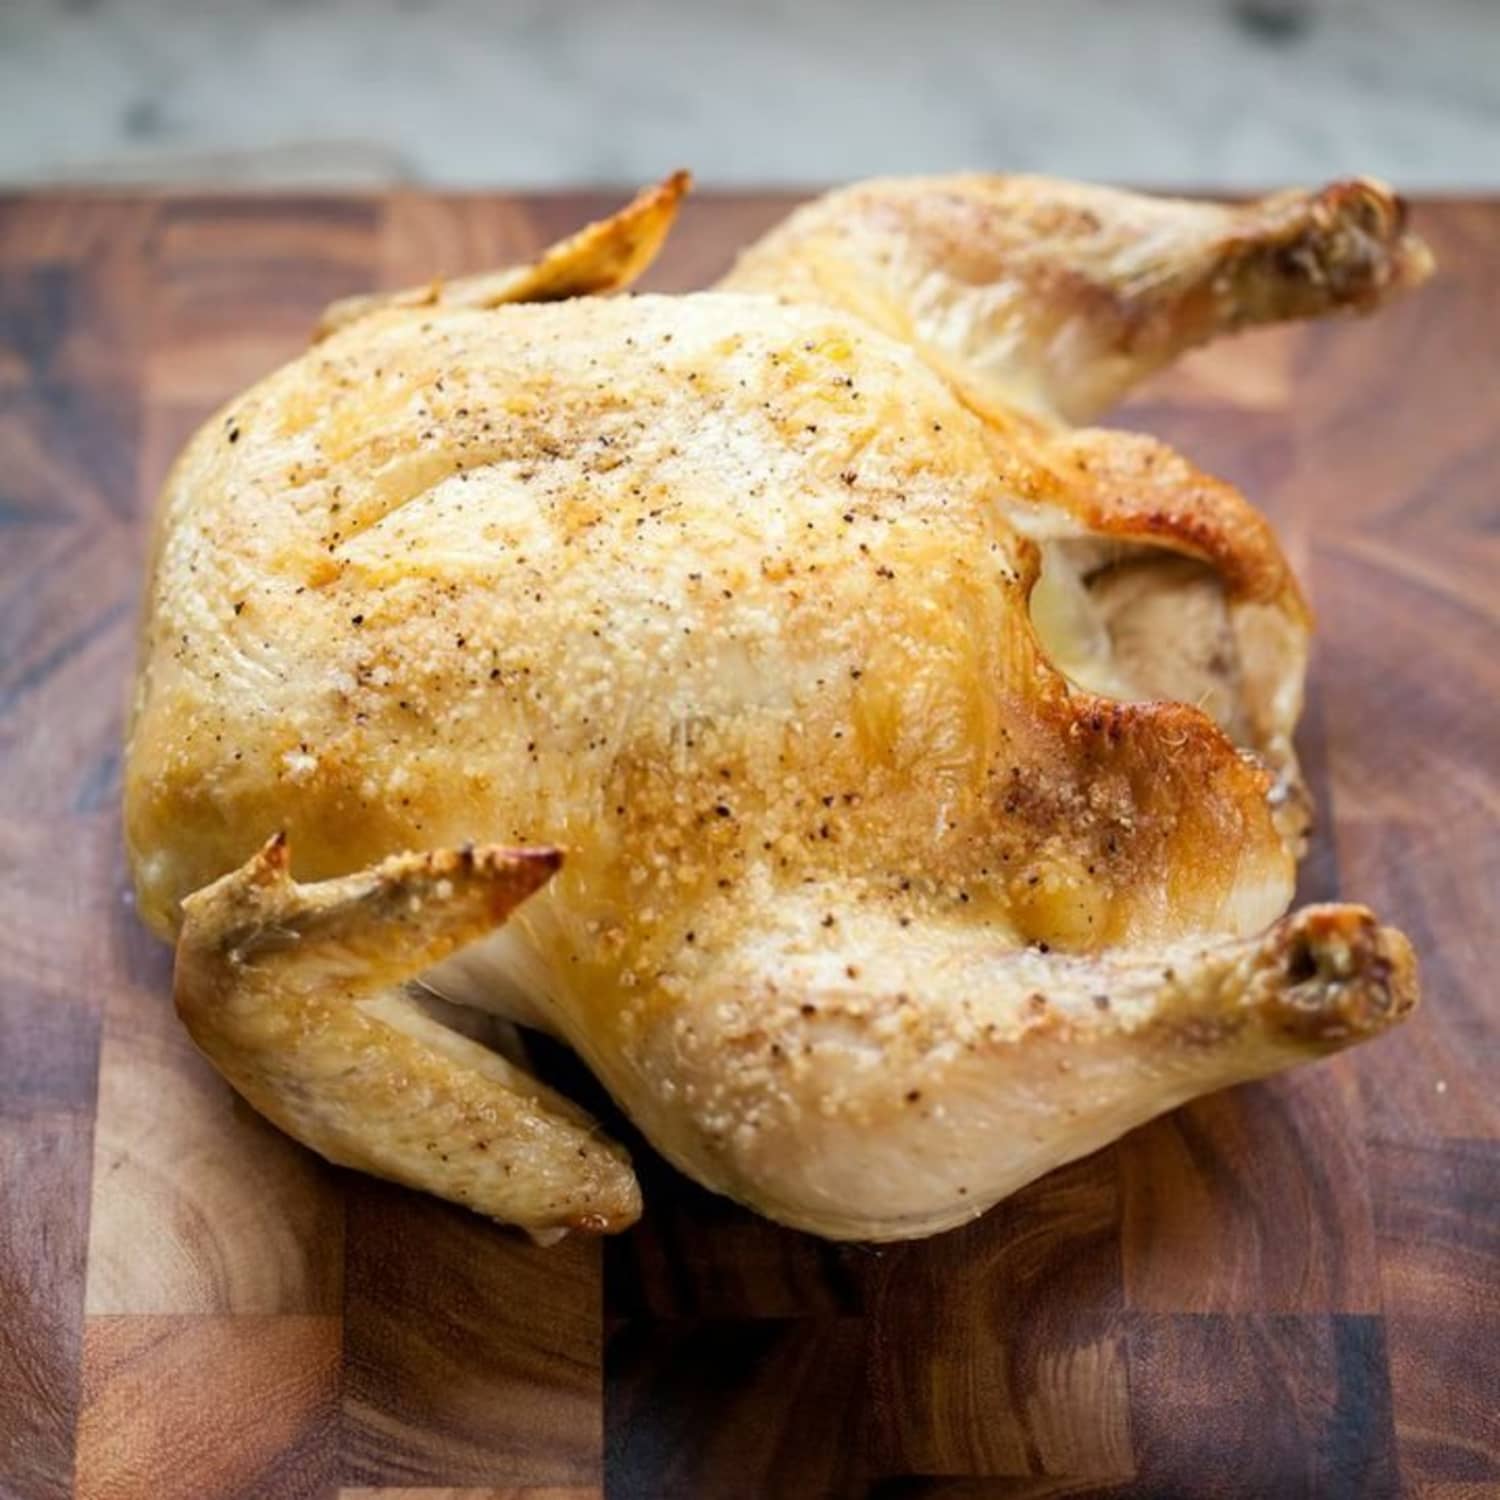 Whole Chicken Broiler